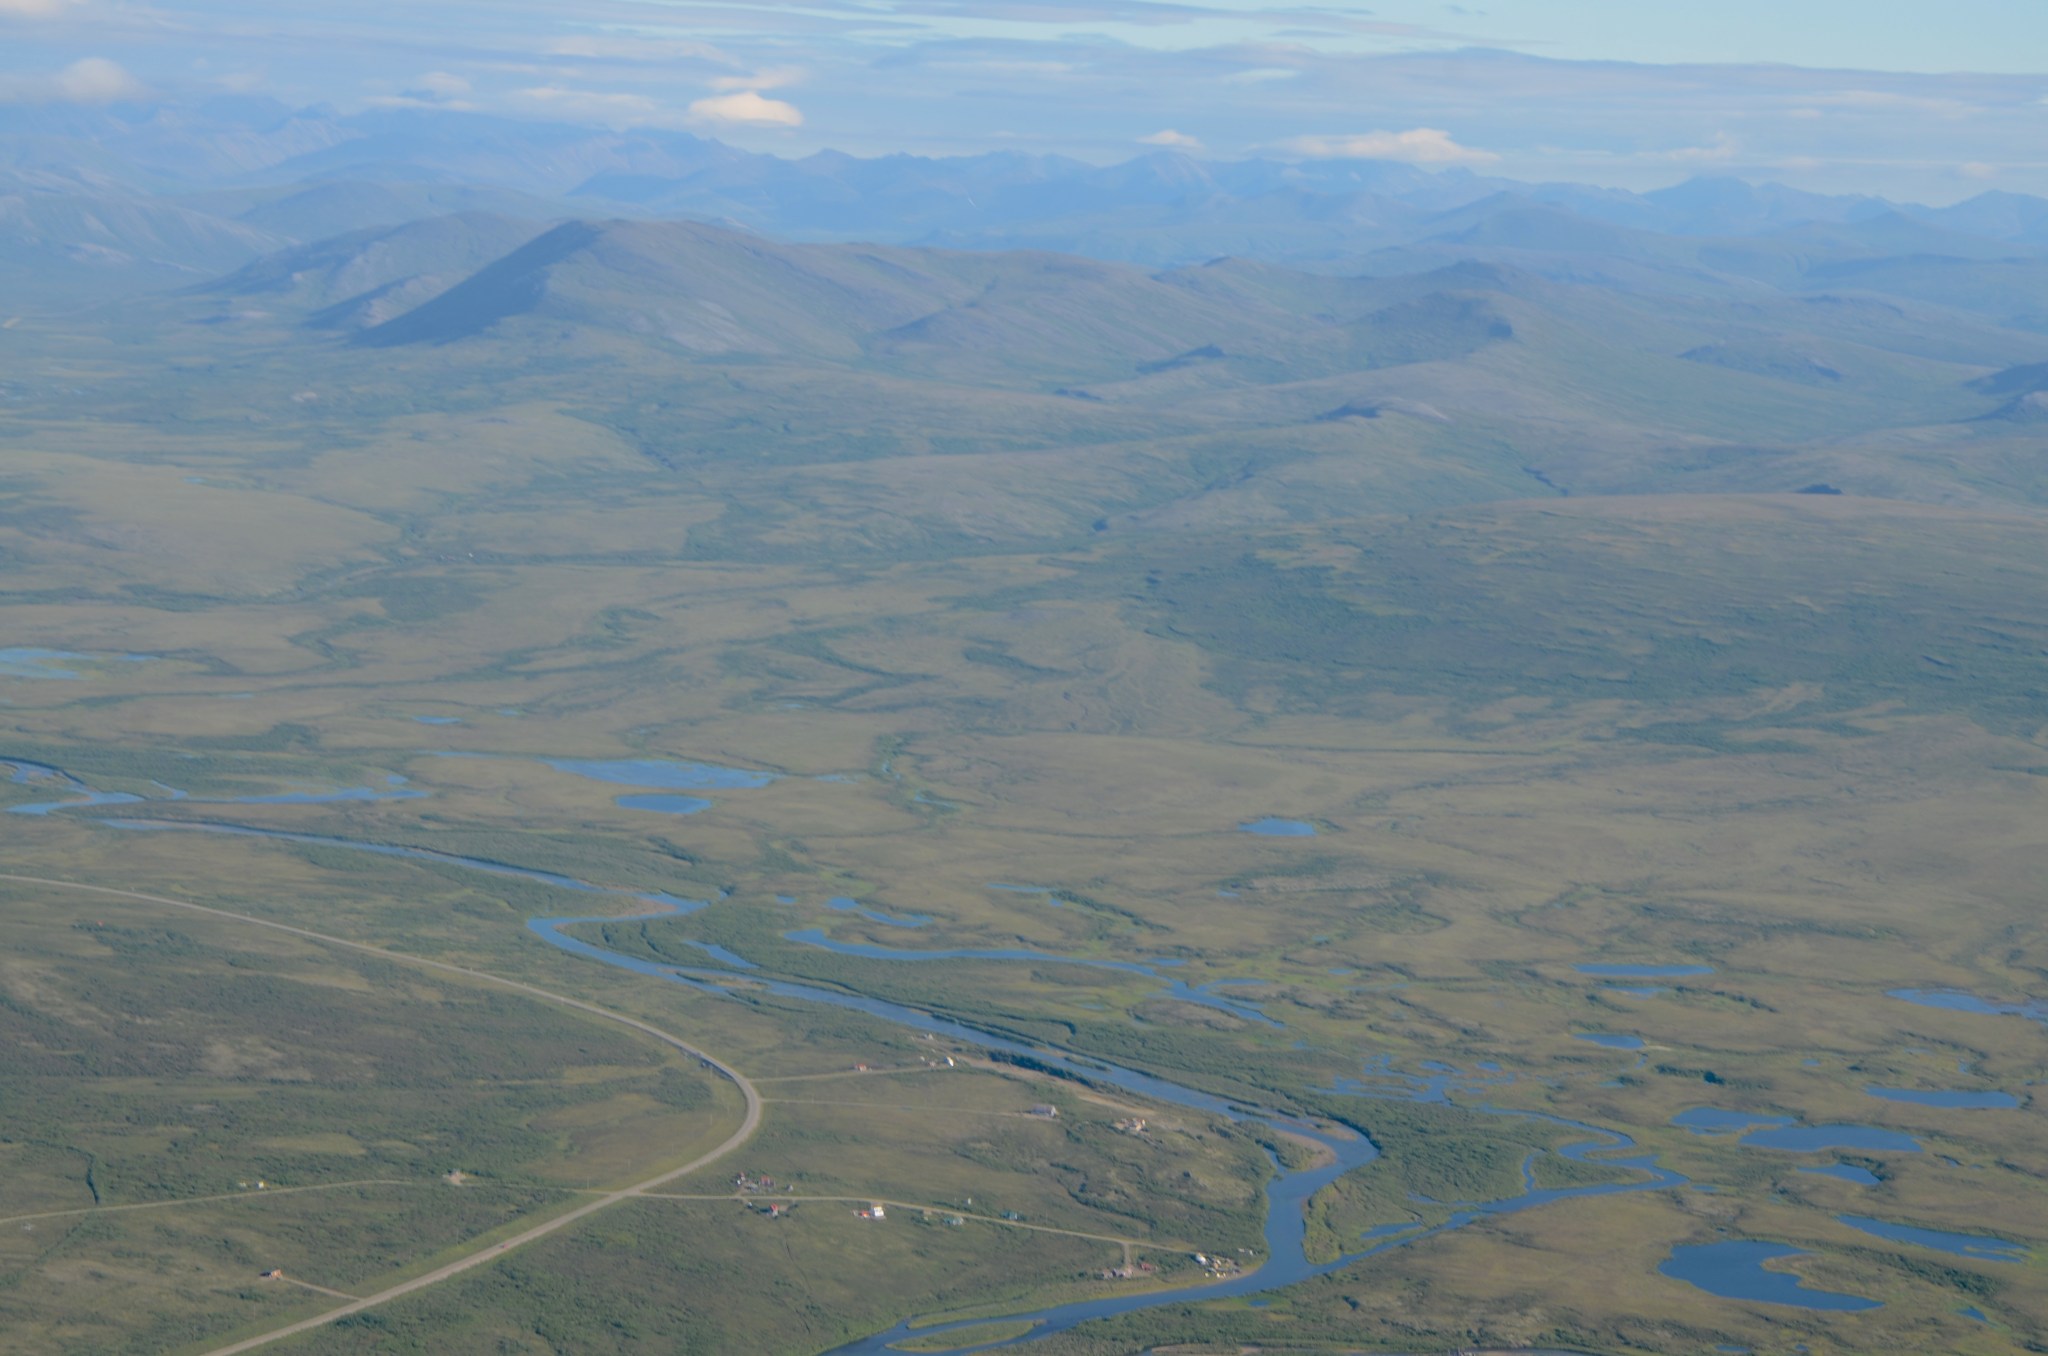 An airborne view of Arctic tundra, with grass and short scrub brush covering most of the ground and thin rivers and small lakes dotting the landscape.